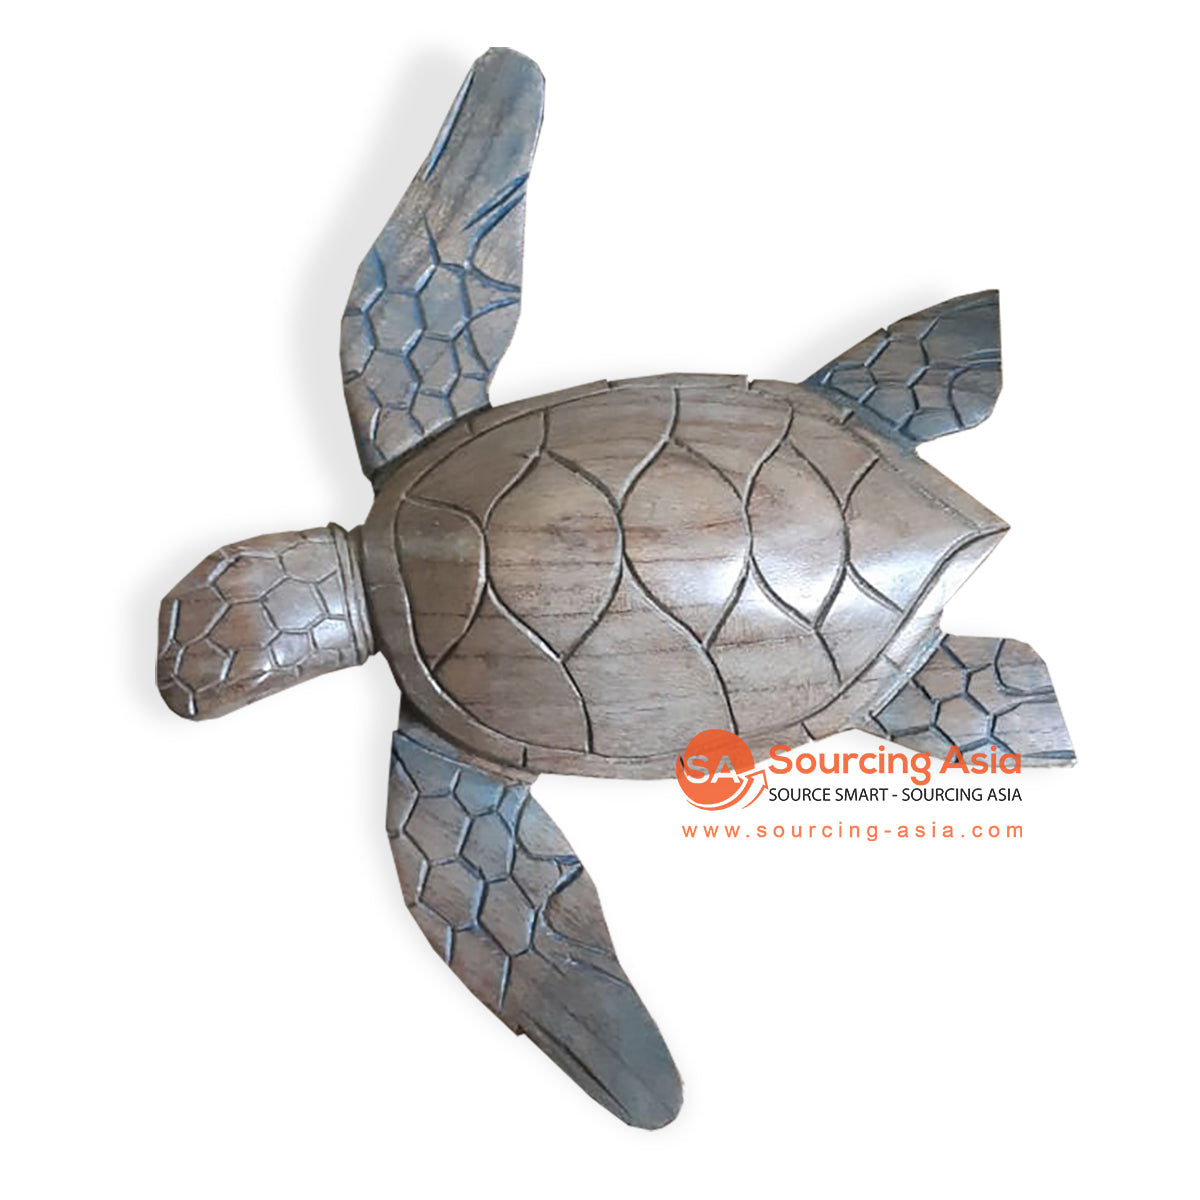 CAH006 NATURAL WOODEN TURTLE STATUE